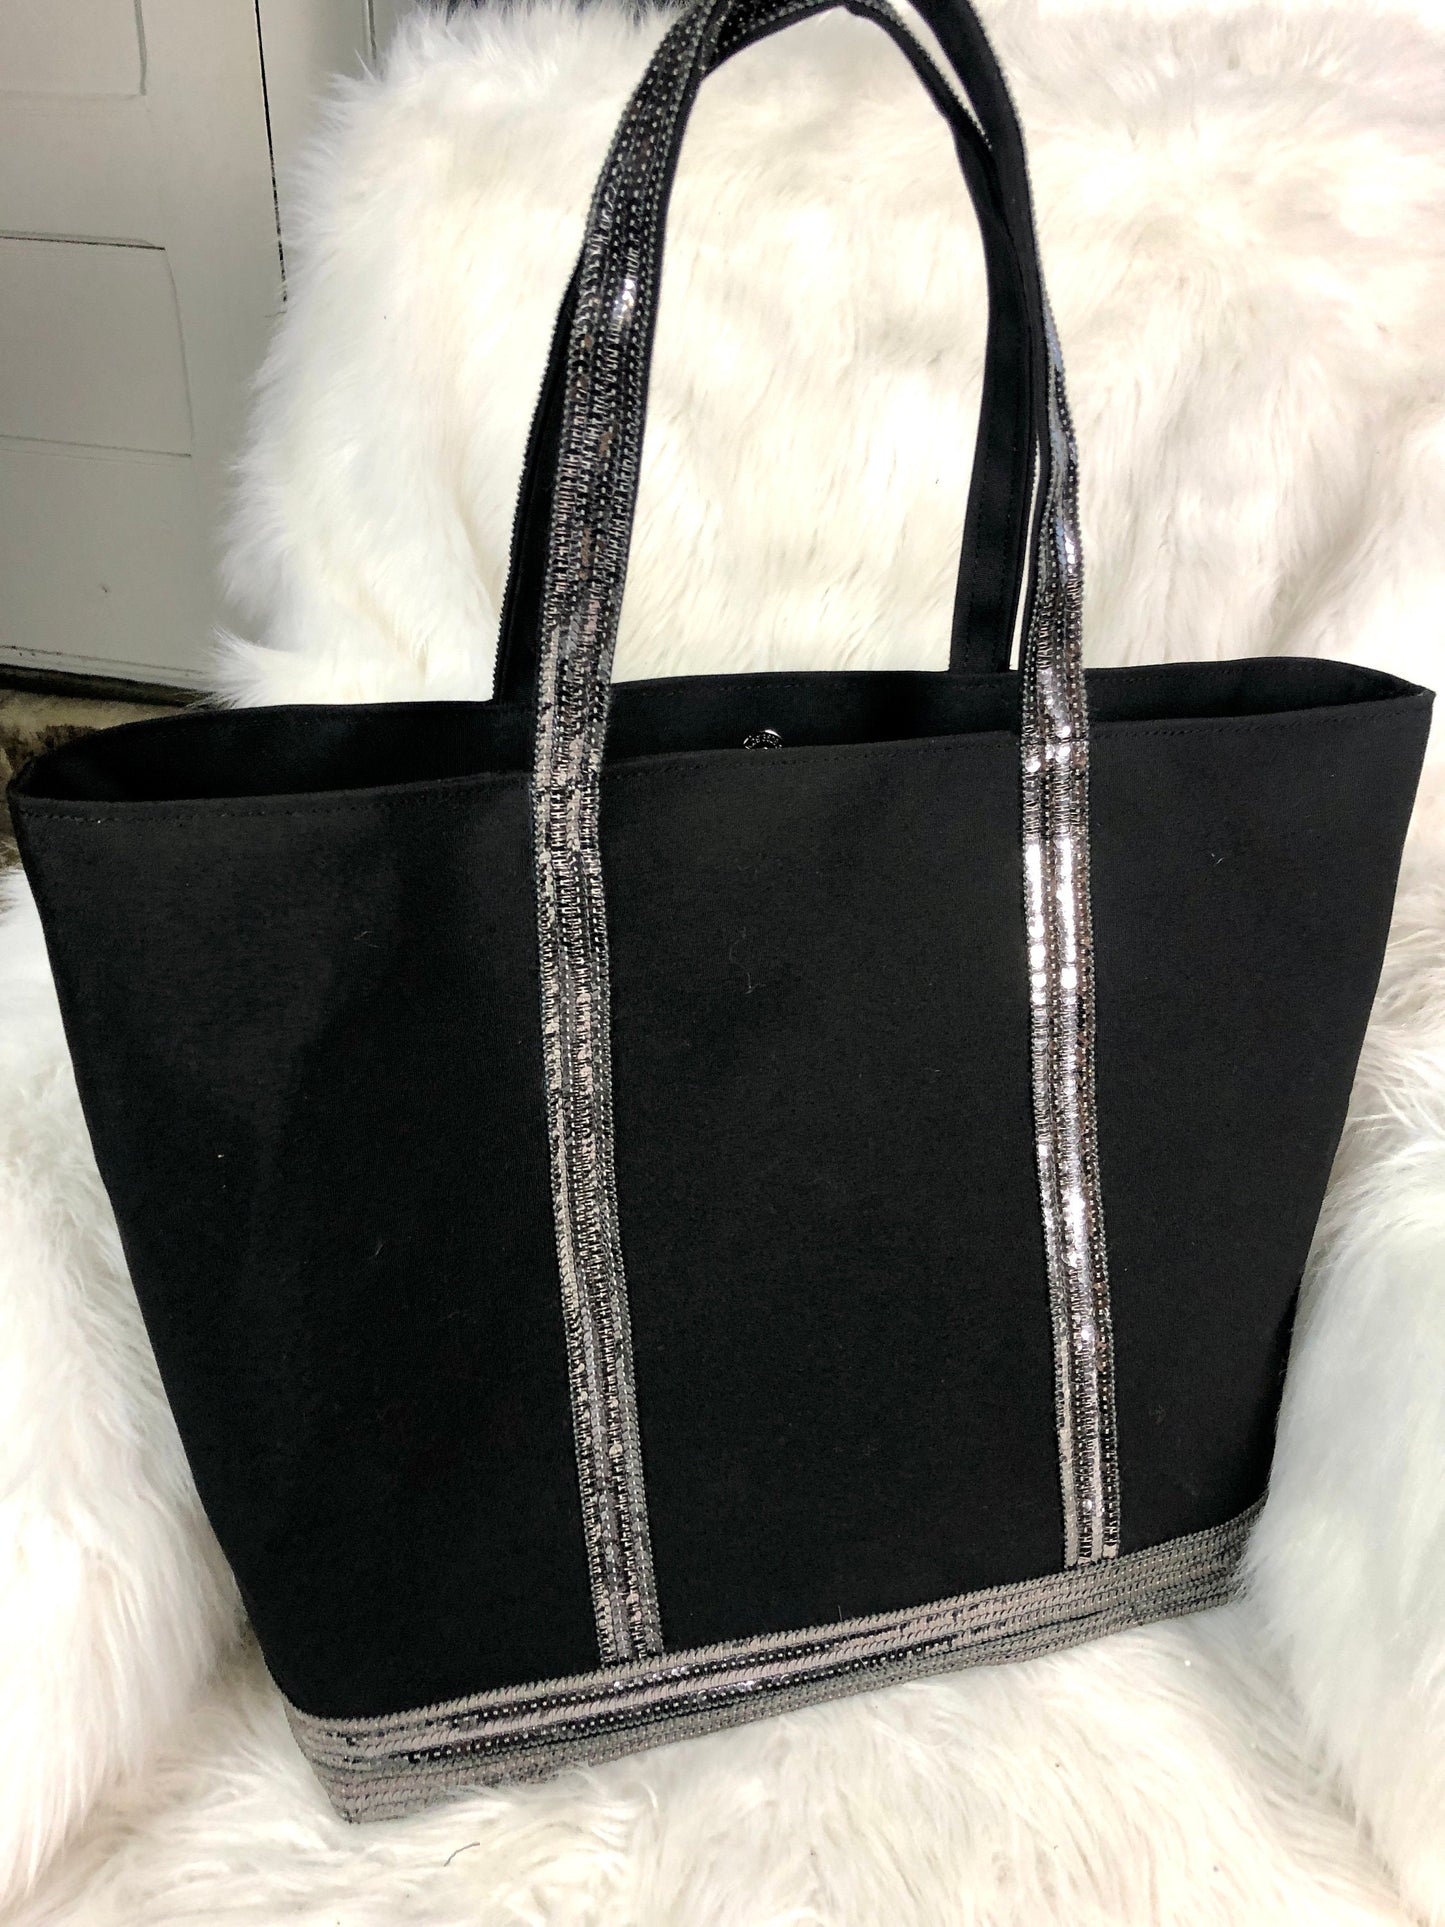 Black cotton canvas tote bag with silver sequin braid